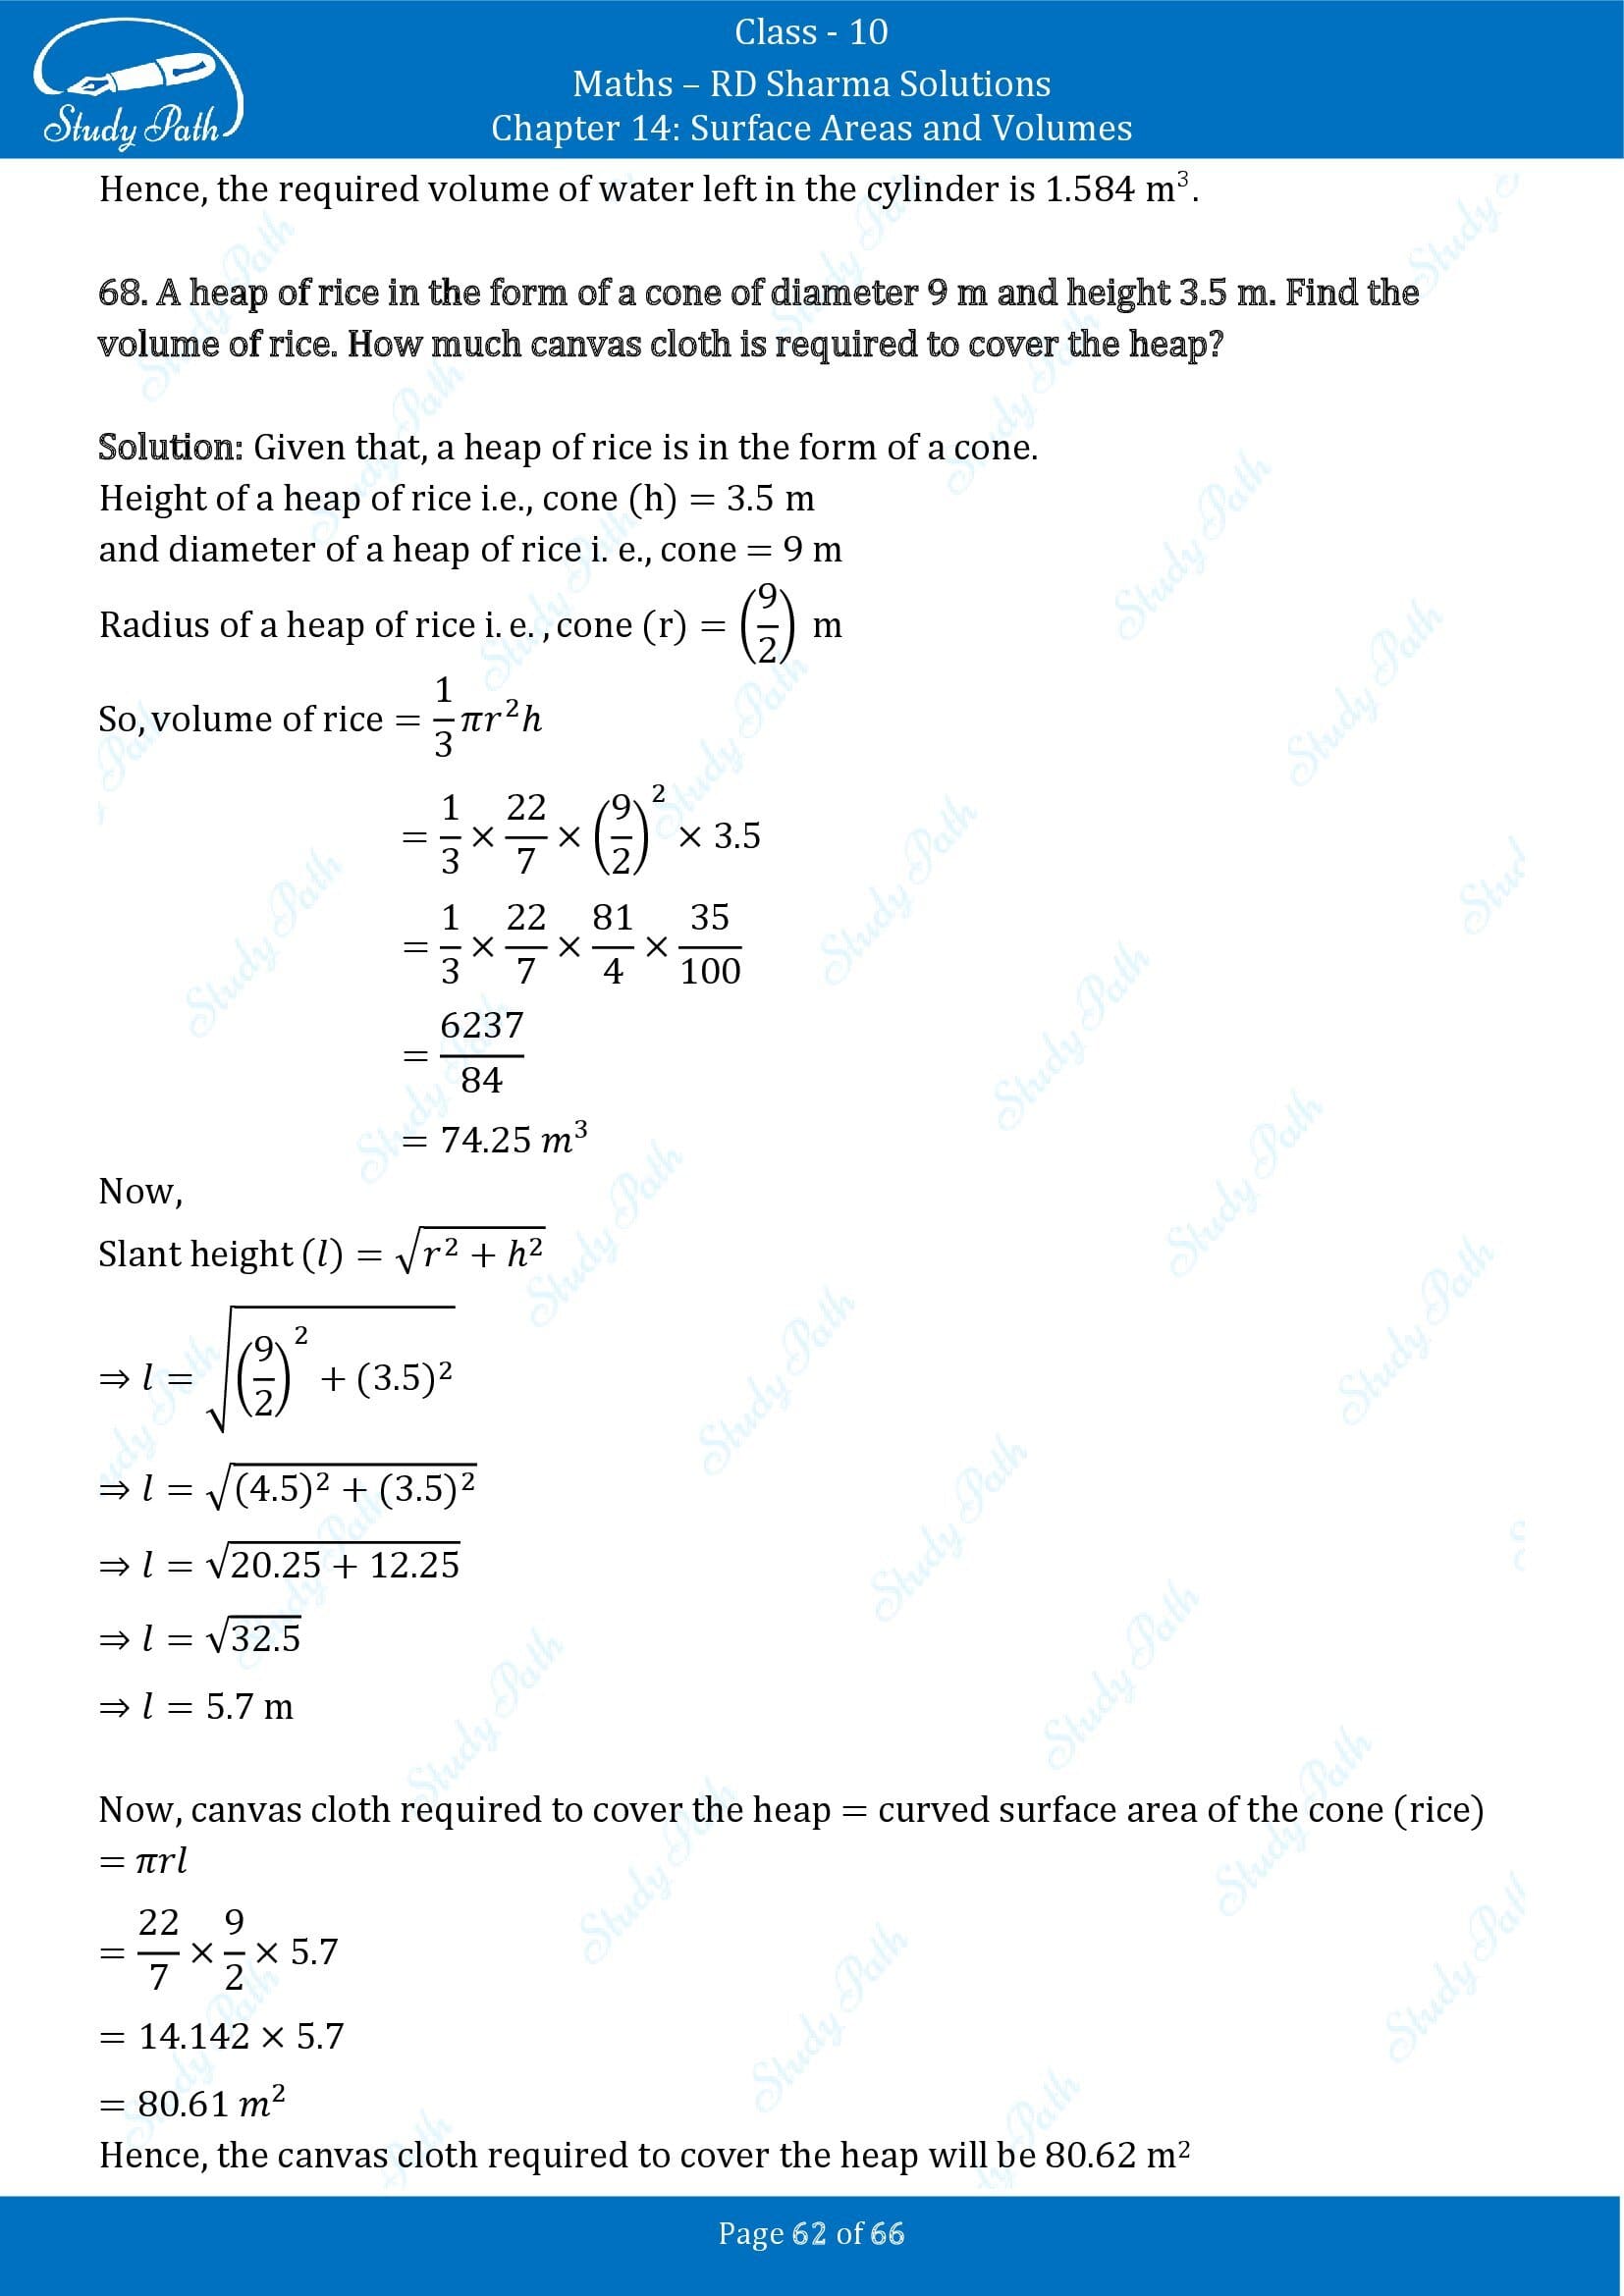 RD Sharma Solutions Class 10 Chapter 14 Surface Areas and Volumes Exercise 14.1 00062